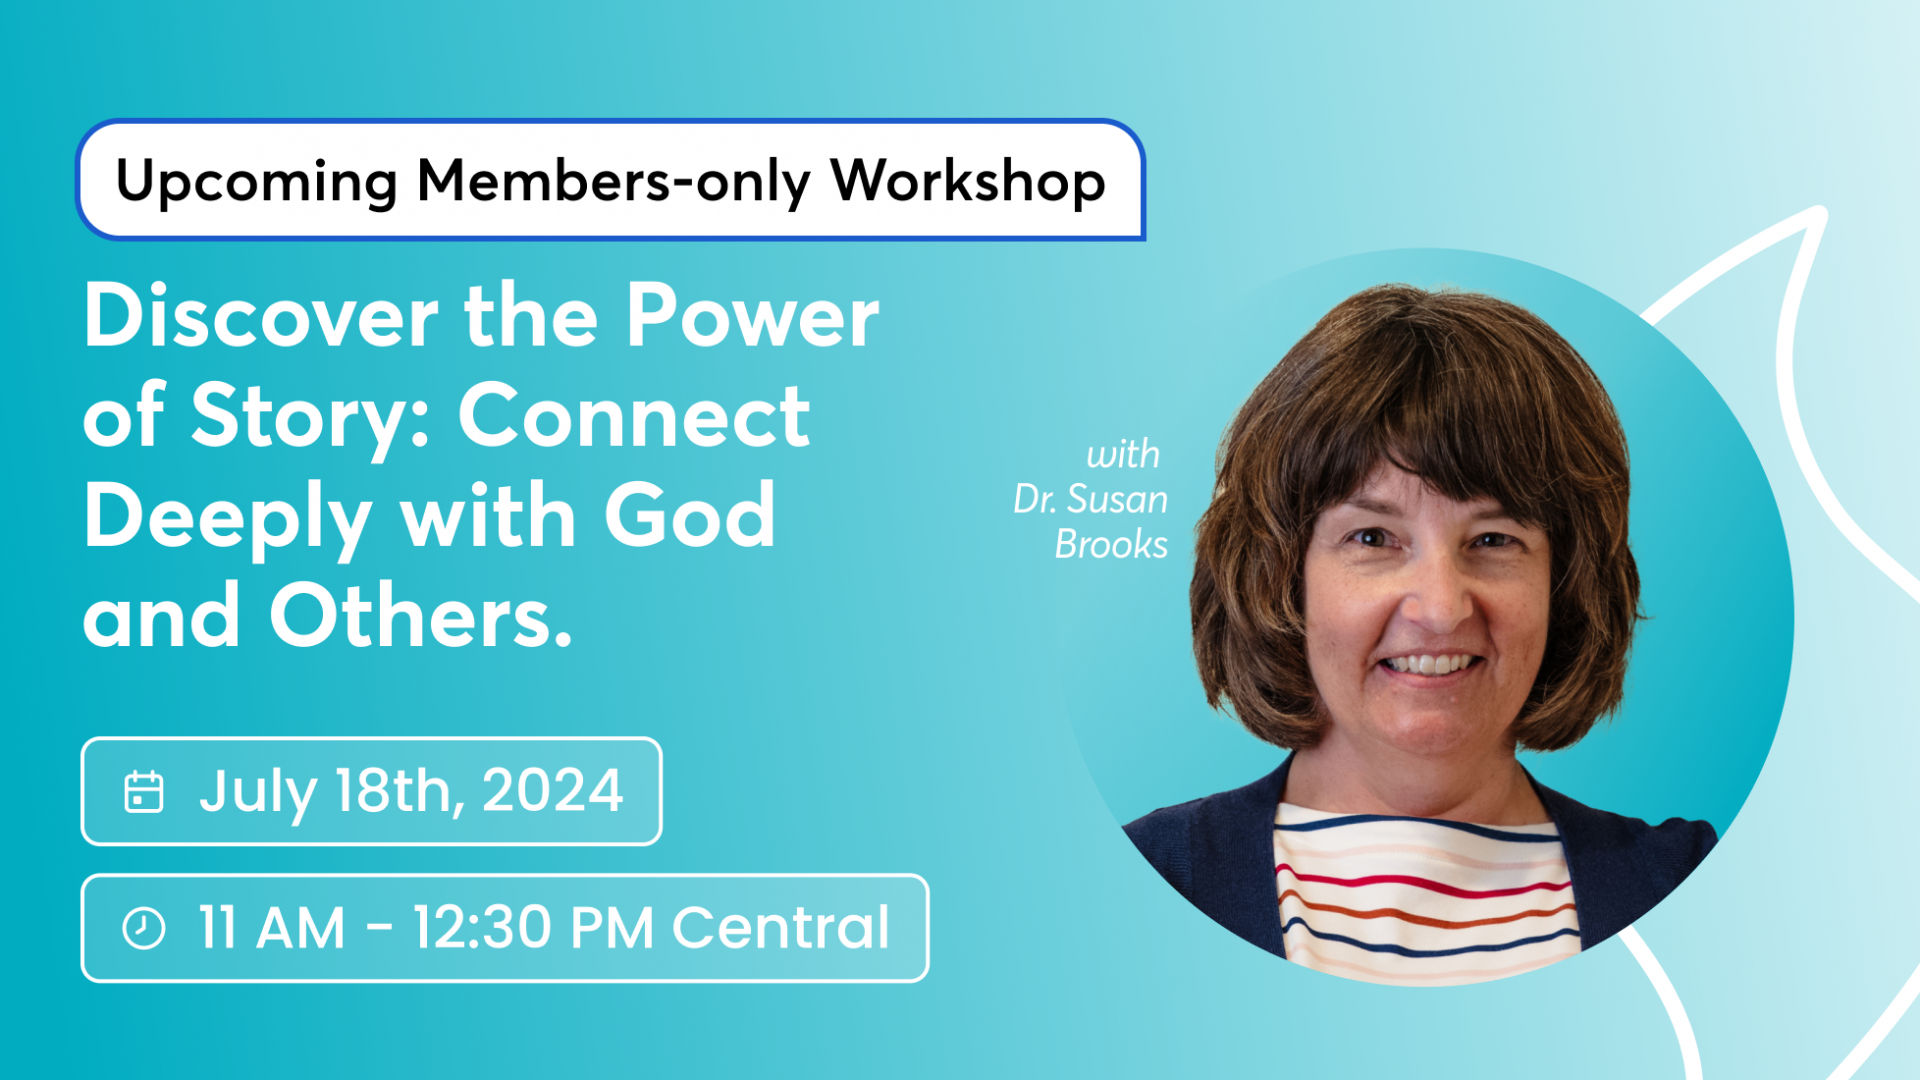 Faith+Lead Workshop Banner: Discover the Power of Story: Connect Deeply with God and Others on July 18th, 2024 in Dr. Susan Brooks' Faith+Lead Members-only workshop. Features a headshot photo of Dr. Susan Brooks.